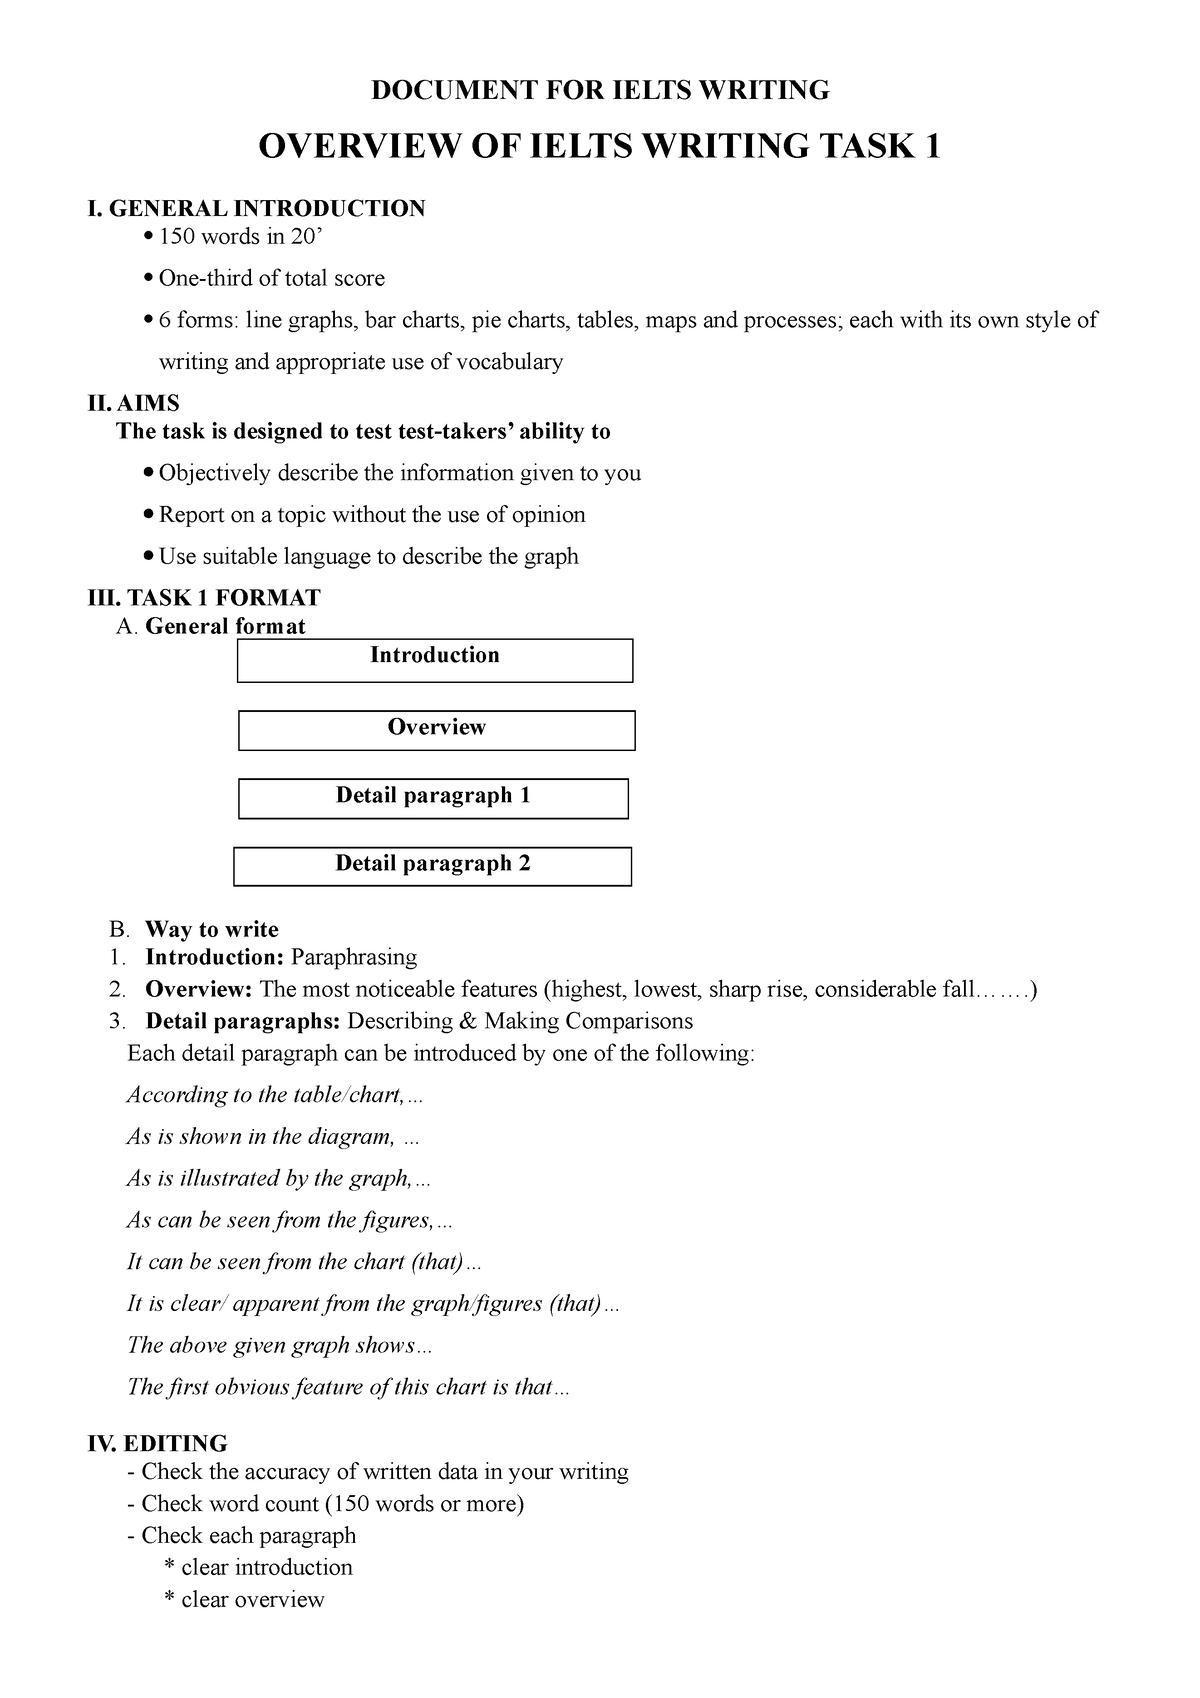 document-for-ielts-writing-document-for-ielts-writing